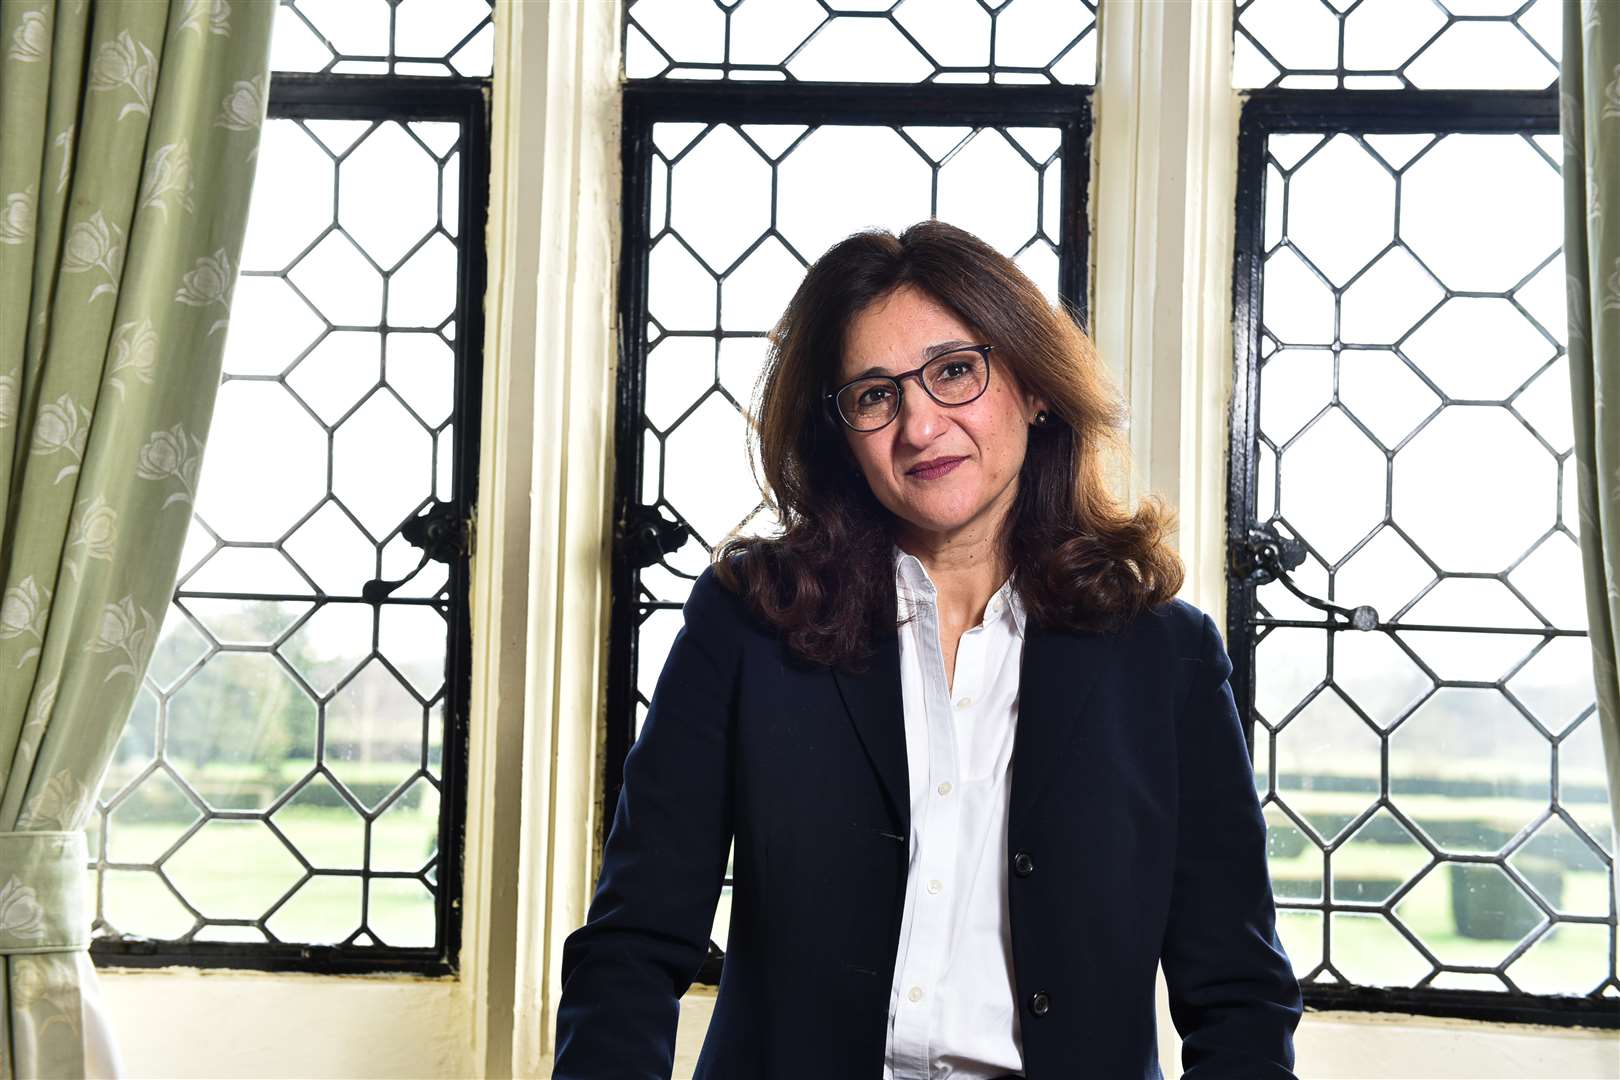 Bank of England deputy governor Minouche Shafik thinks Kent is at the "forefront" of the nation's economic recovery